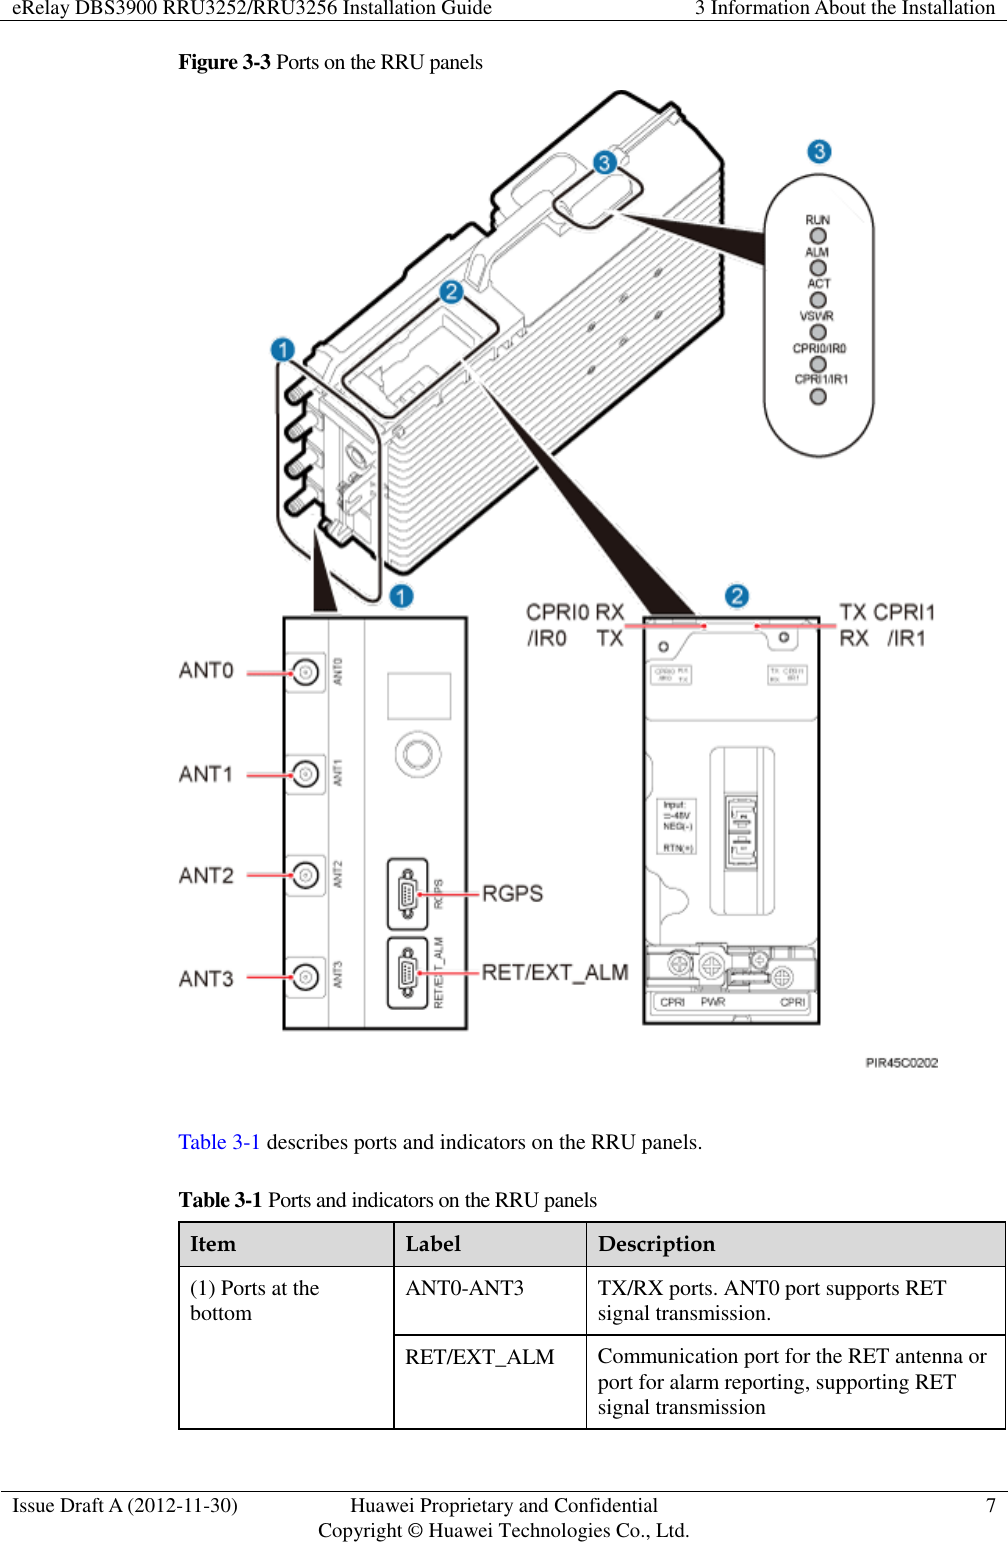 eRelay DBS3900 RRU3252/RRU3256 Installation Guide 3 Information About the Installation  Issue Draft A (2012-11-30) Huawei Proprietary and Confidential                                     Copyright © Huawei Technologies Co., Ltd. 7  Figure 3-3 Ports on the RRU panels   Table 3-1 describes ports and indicators on the RRU panels. Table 3-1 Ports and indicators on the RRU panels Item Label Description (1) Ports at the bottom ANT0-ANT3 TX/RX ports. ANT0 port supports RET signal transmission. RET/EXT_ALM Communication port for the RET antenna or port for alarm reporting, supporting RET signal transmission 